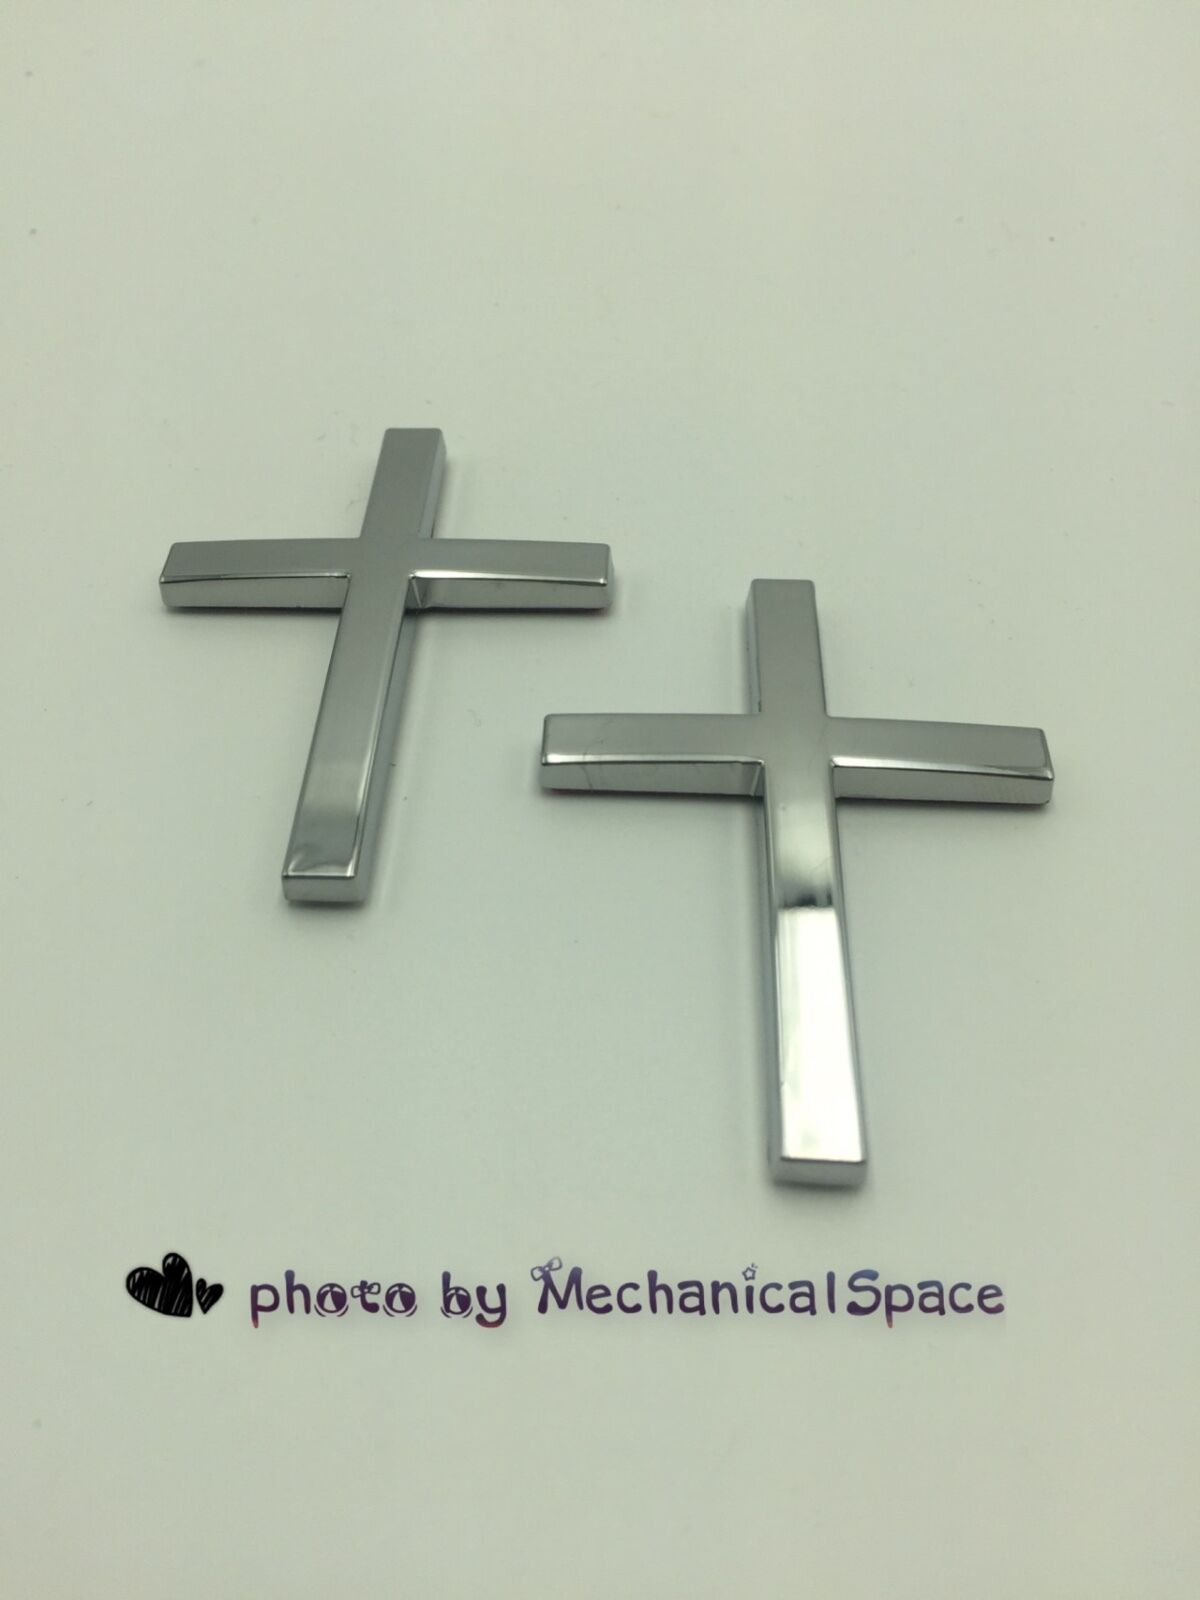 2X SILVER CHRISTIAN CROSS 3D EMBLEM DECAL LOGO BADGE STICKER FOR CAR MOTORCYCLE 